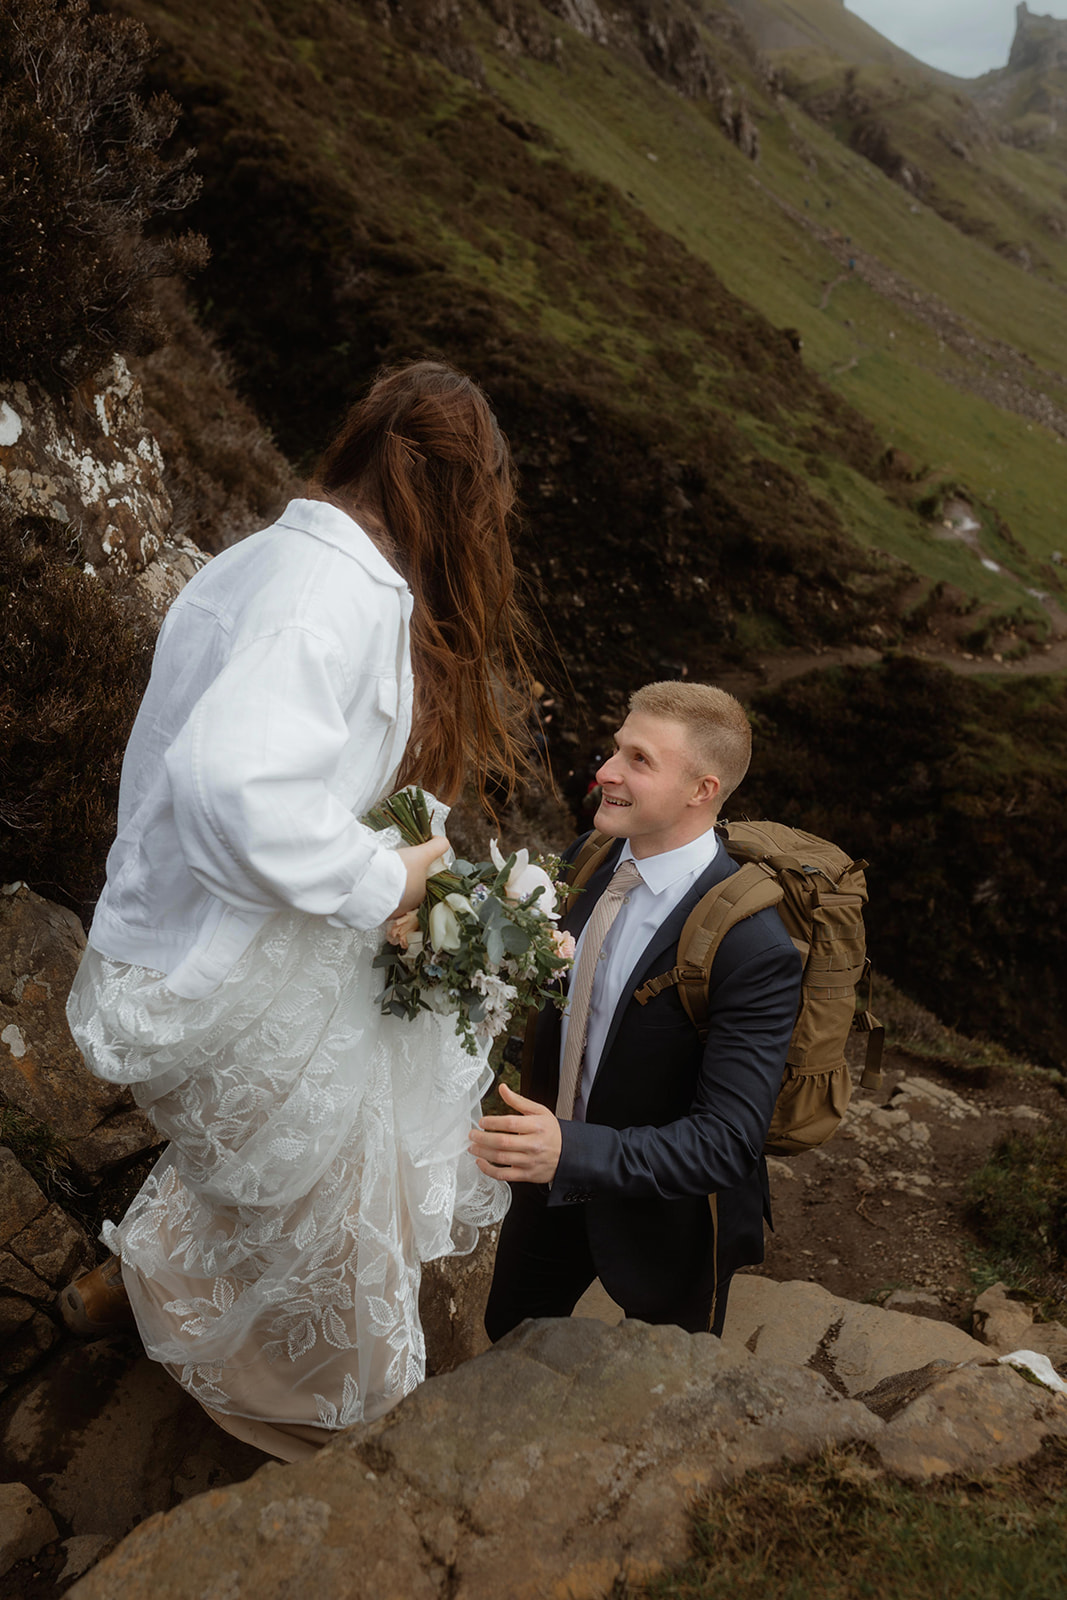 Elopement couples Emma and Matthew walked hand in hand at Quiraing, Isle of Skye.